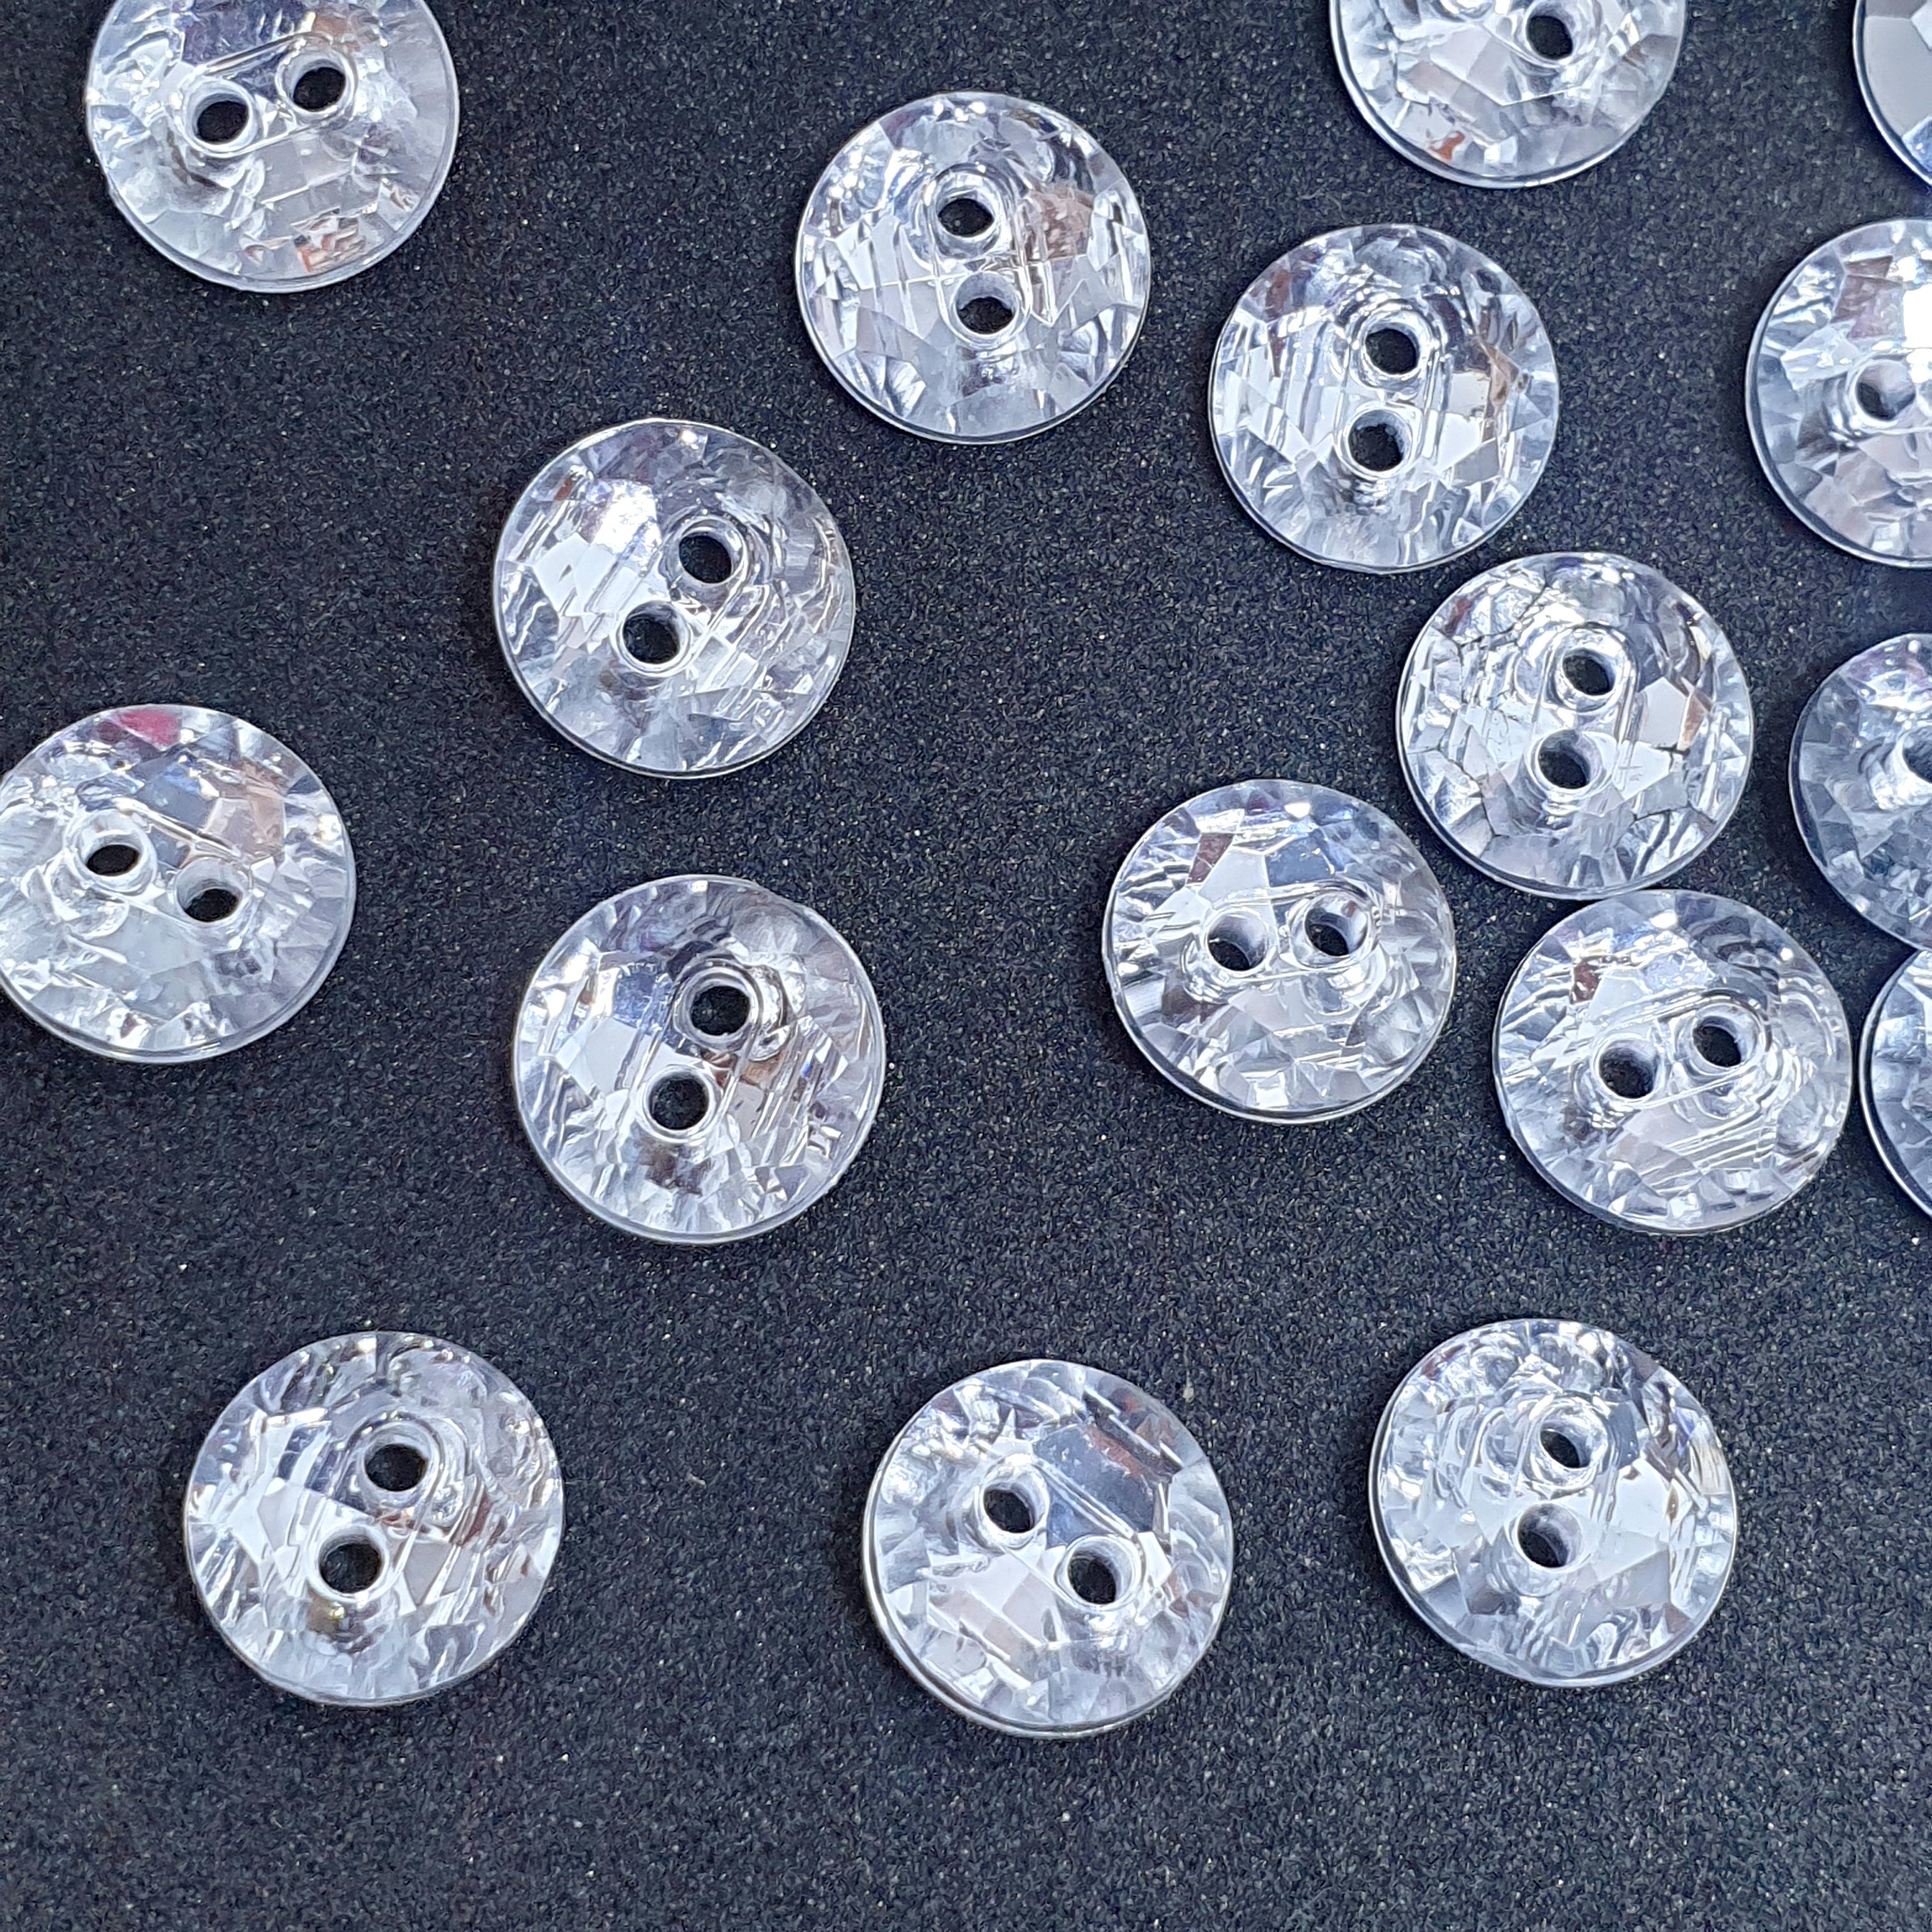 MajorCrafts 48pcs 10mm Crystal Clear Faceted Acrylic 2 Holes Small Round Sewing Buttons